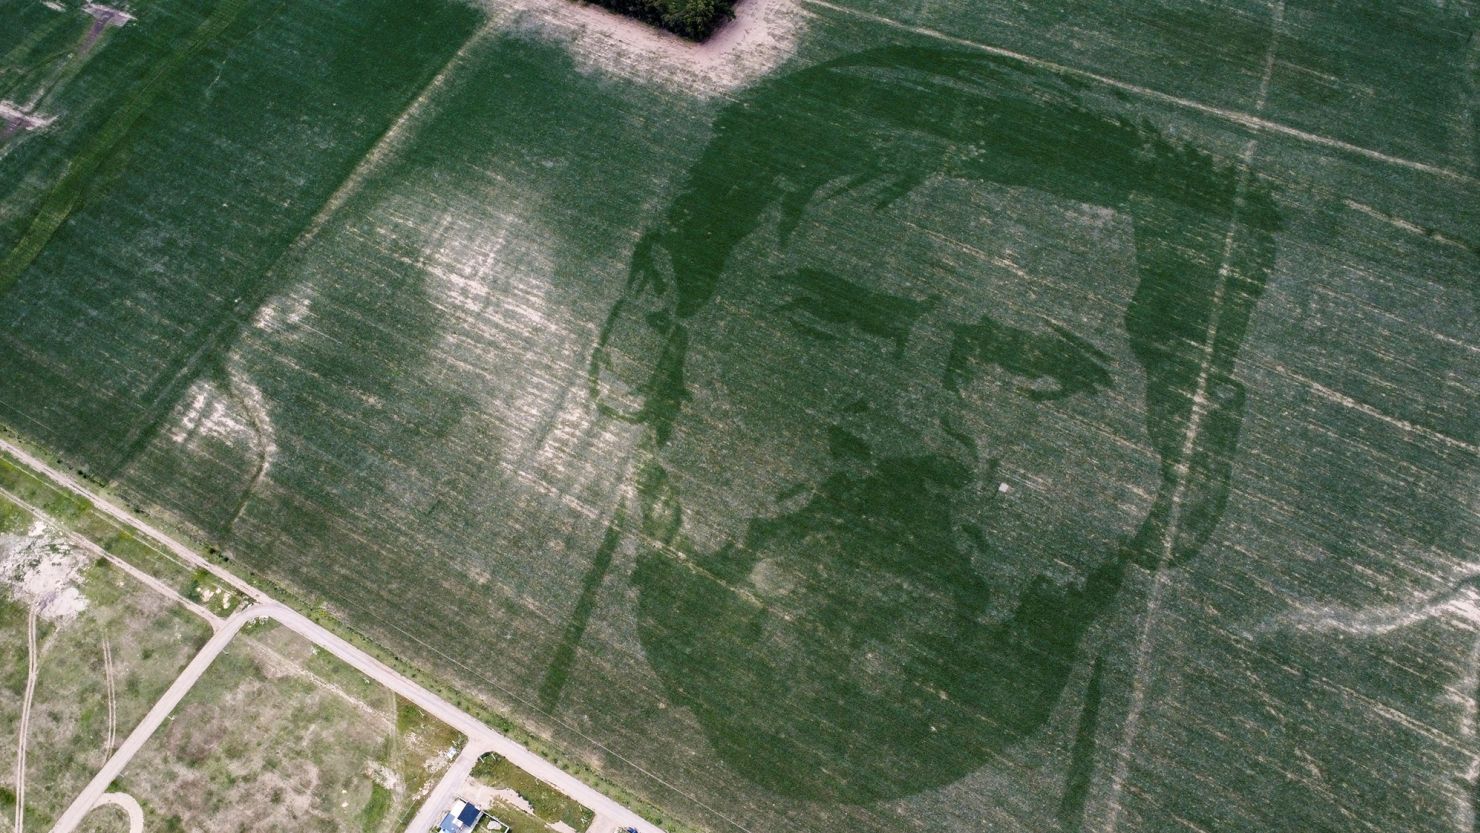 Lionel Messi is immortalized in a corn field in Los Condores, on the outskirts of Córdoba, Argentina.